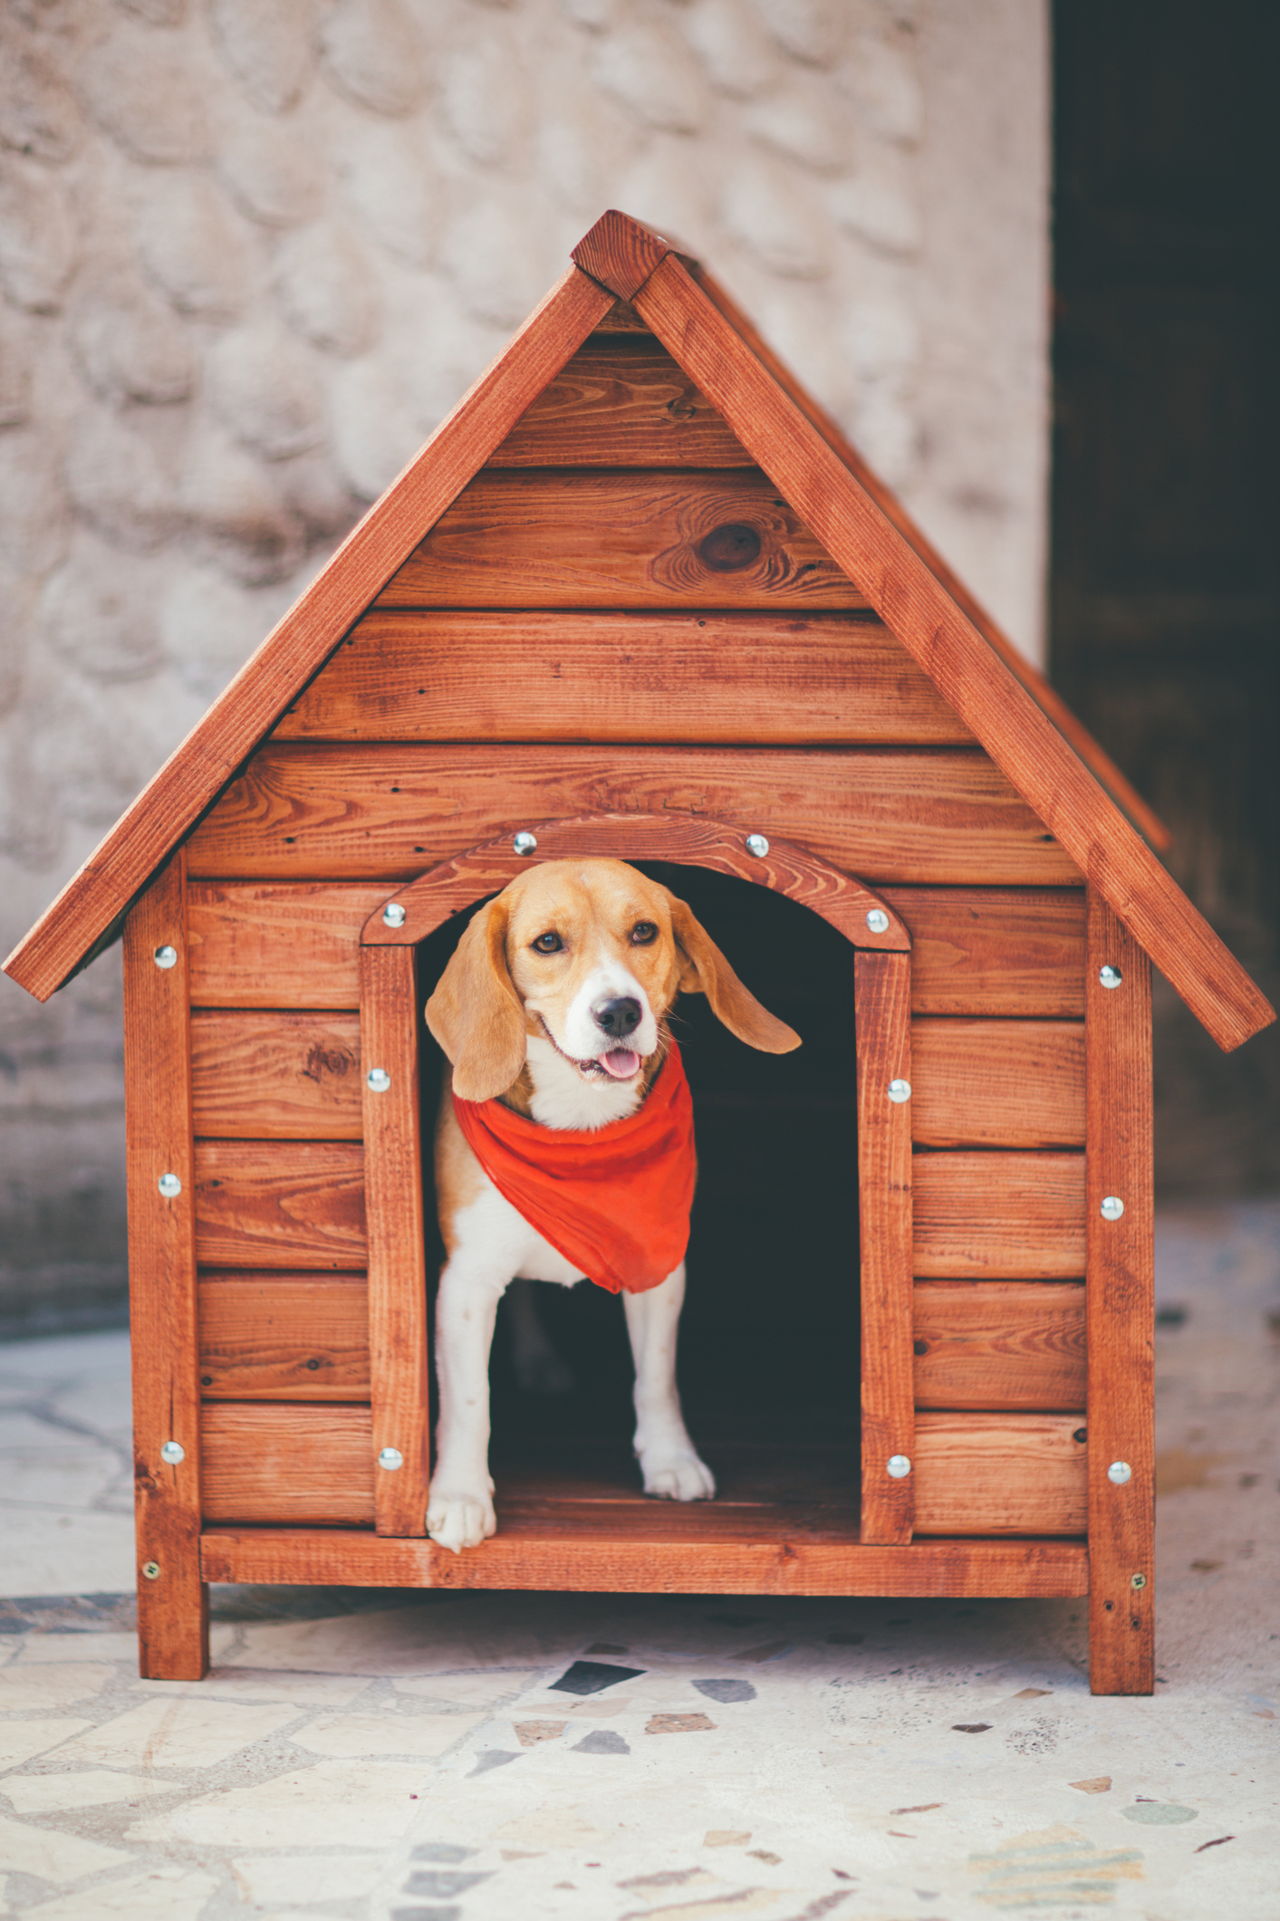 A Visual Guide on How to Build a Dog House in 8 Simple 